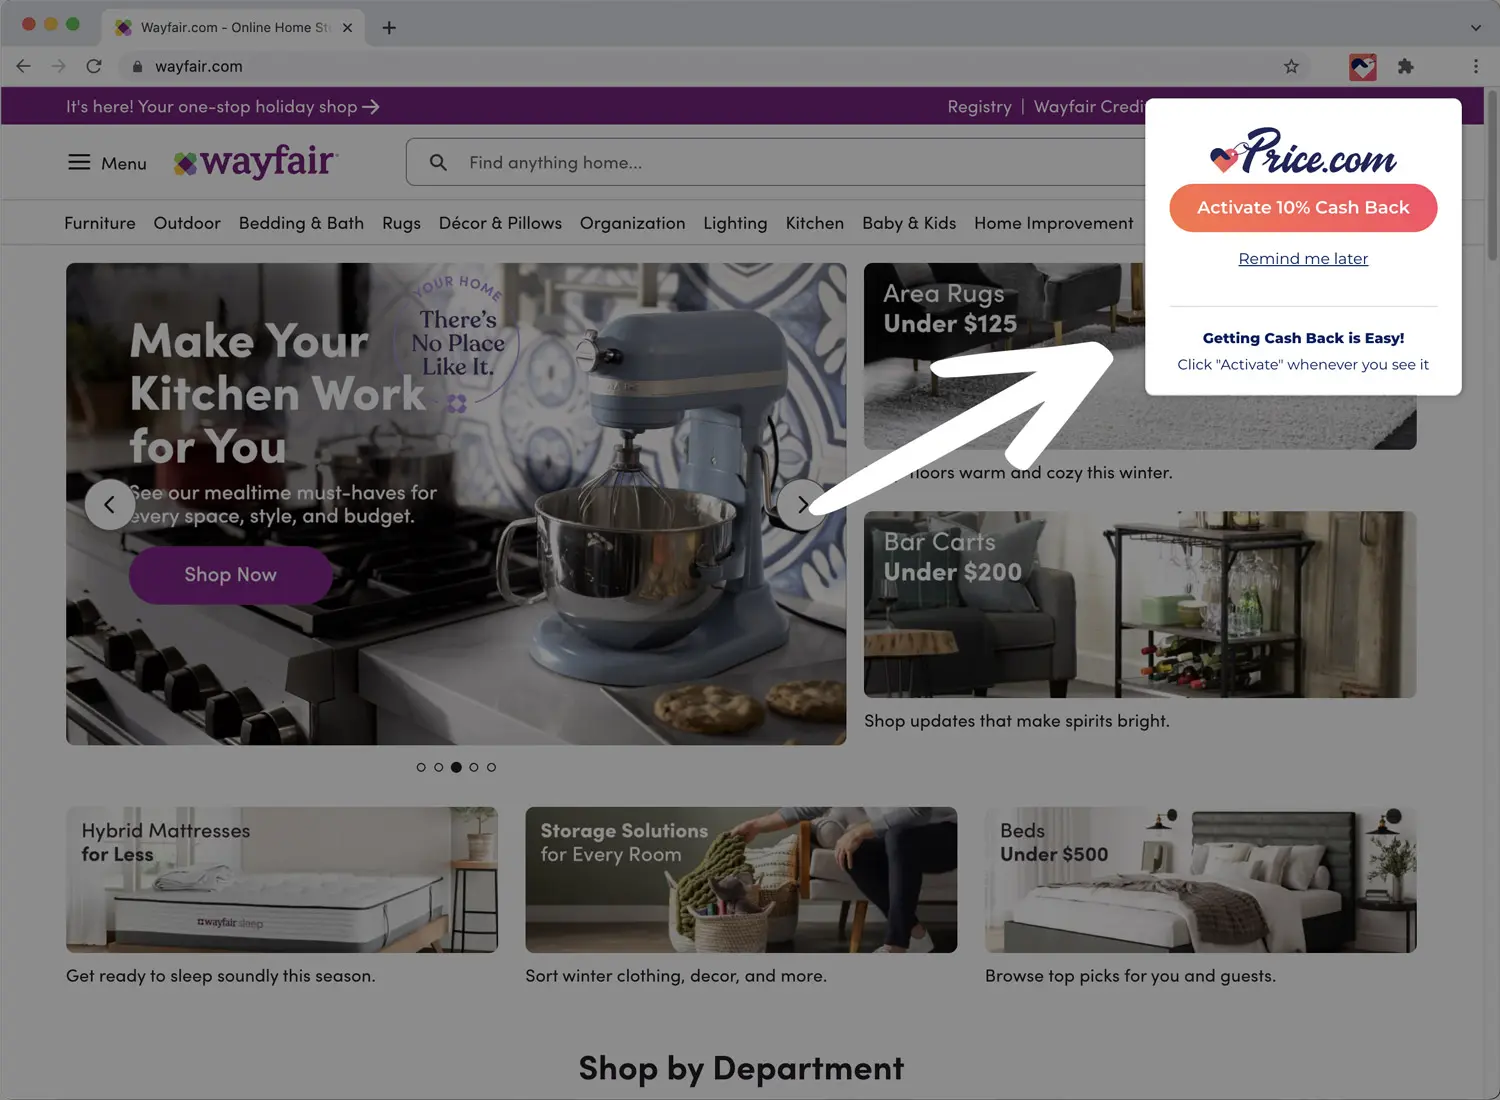 The Price.com Extension at work on Wayfair